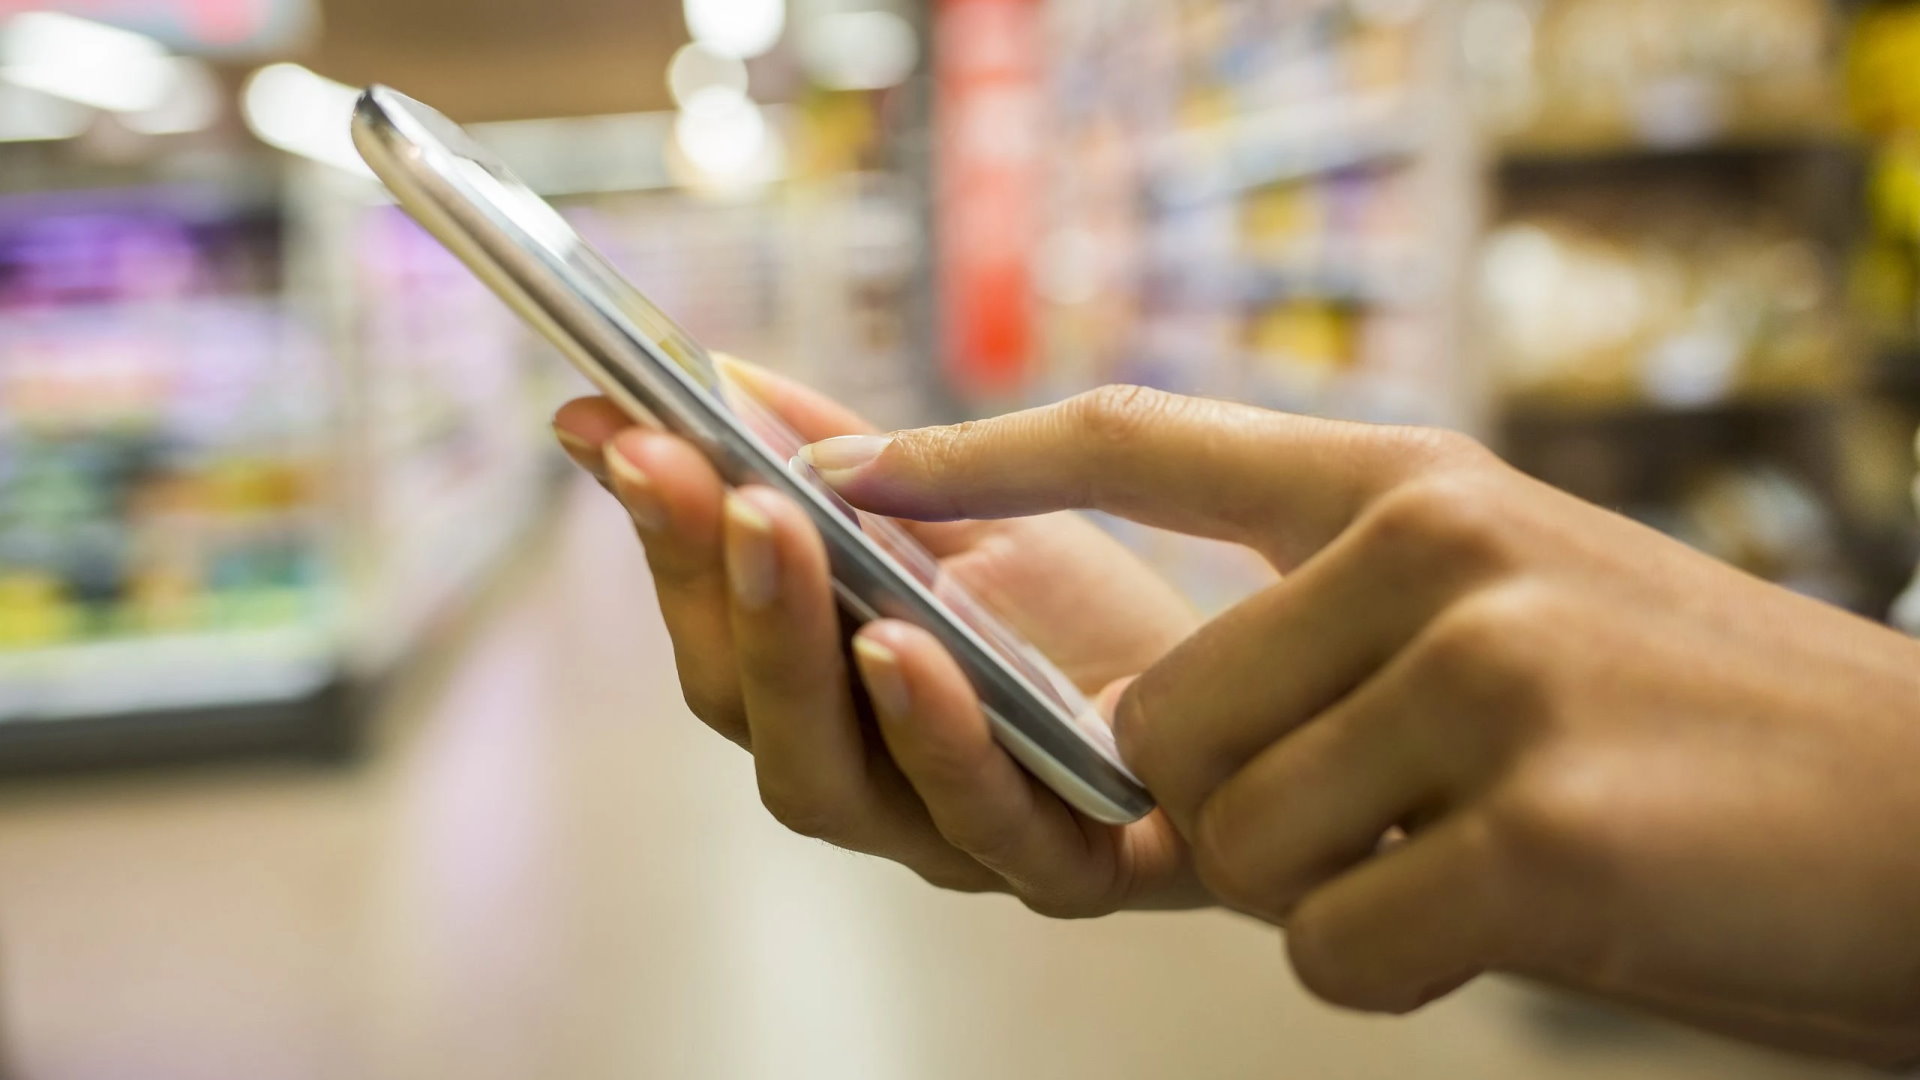 The benefits of shopping for health products on your phone